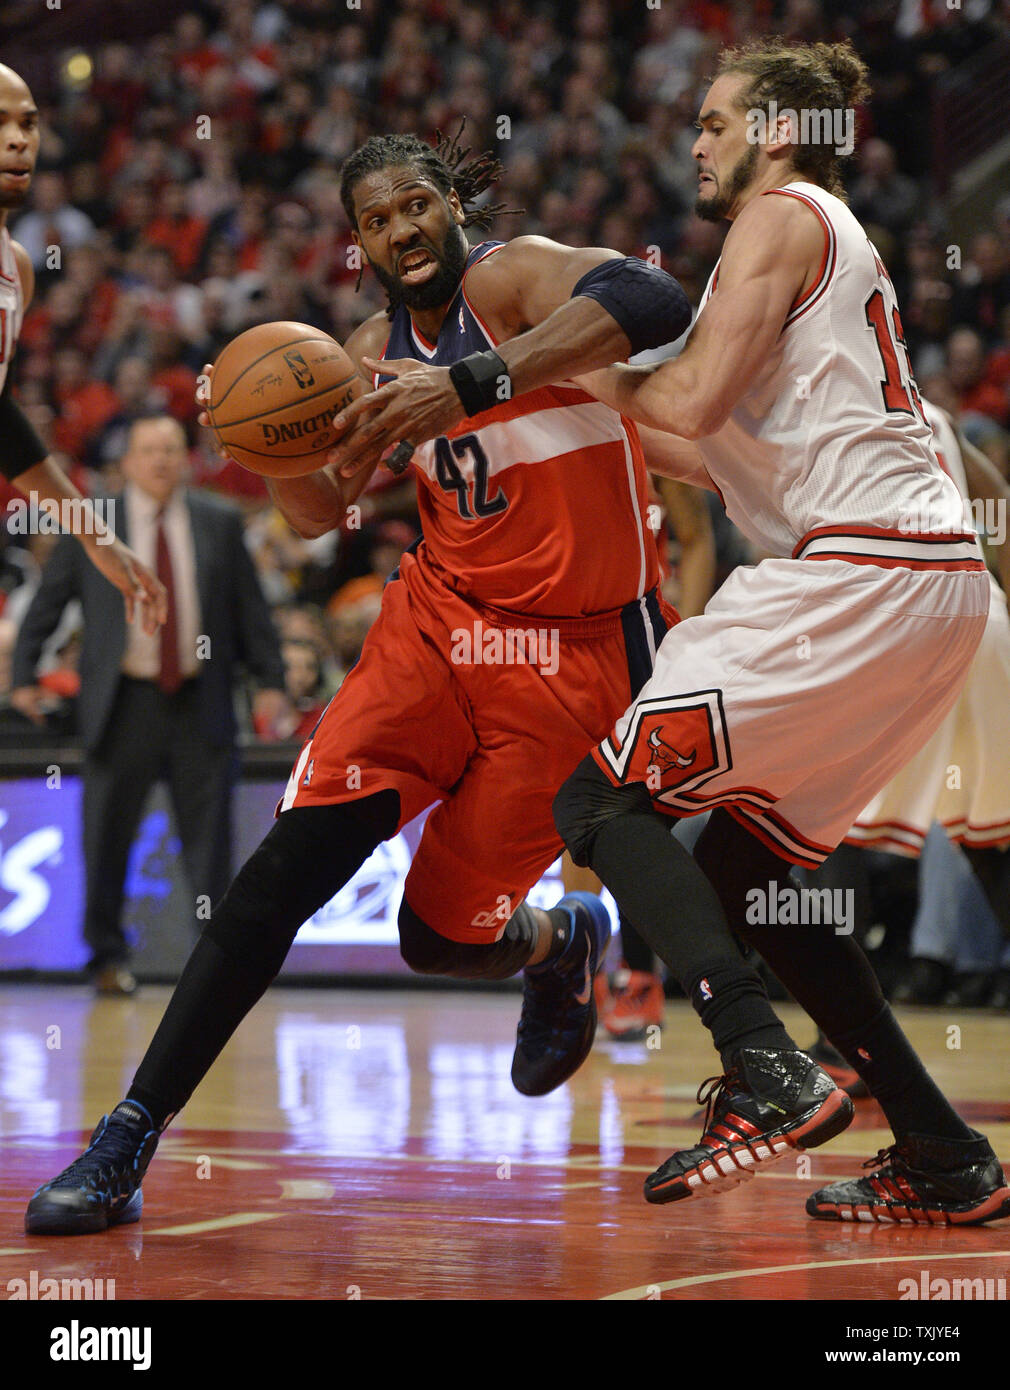 Washington Wizards forward Nene Hilario (L) drives on Chicago Bulls center Joakim Noah during the fourth quarter of Game 2 of the NBA Eastern Conference quarterfinals at the United Center on April 22, 2014 in Chicago. The Wizards defeated the Bulls 101-99 in overtime and lead the best of seven series 2-0.     UPI/Brian Kersey Stock Photo